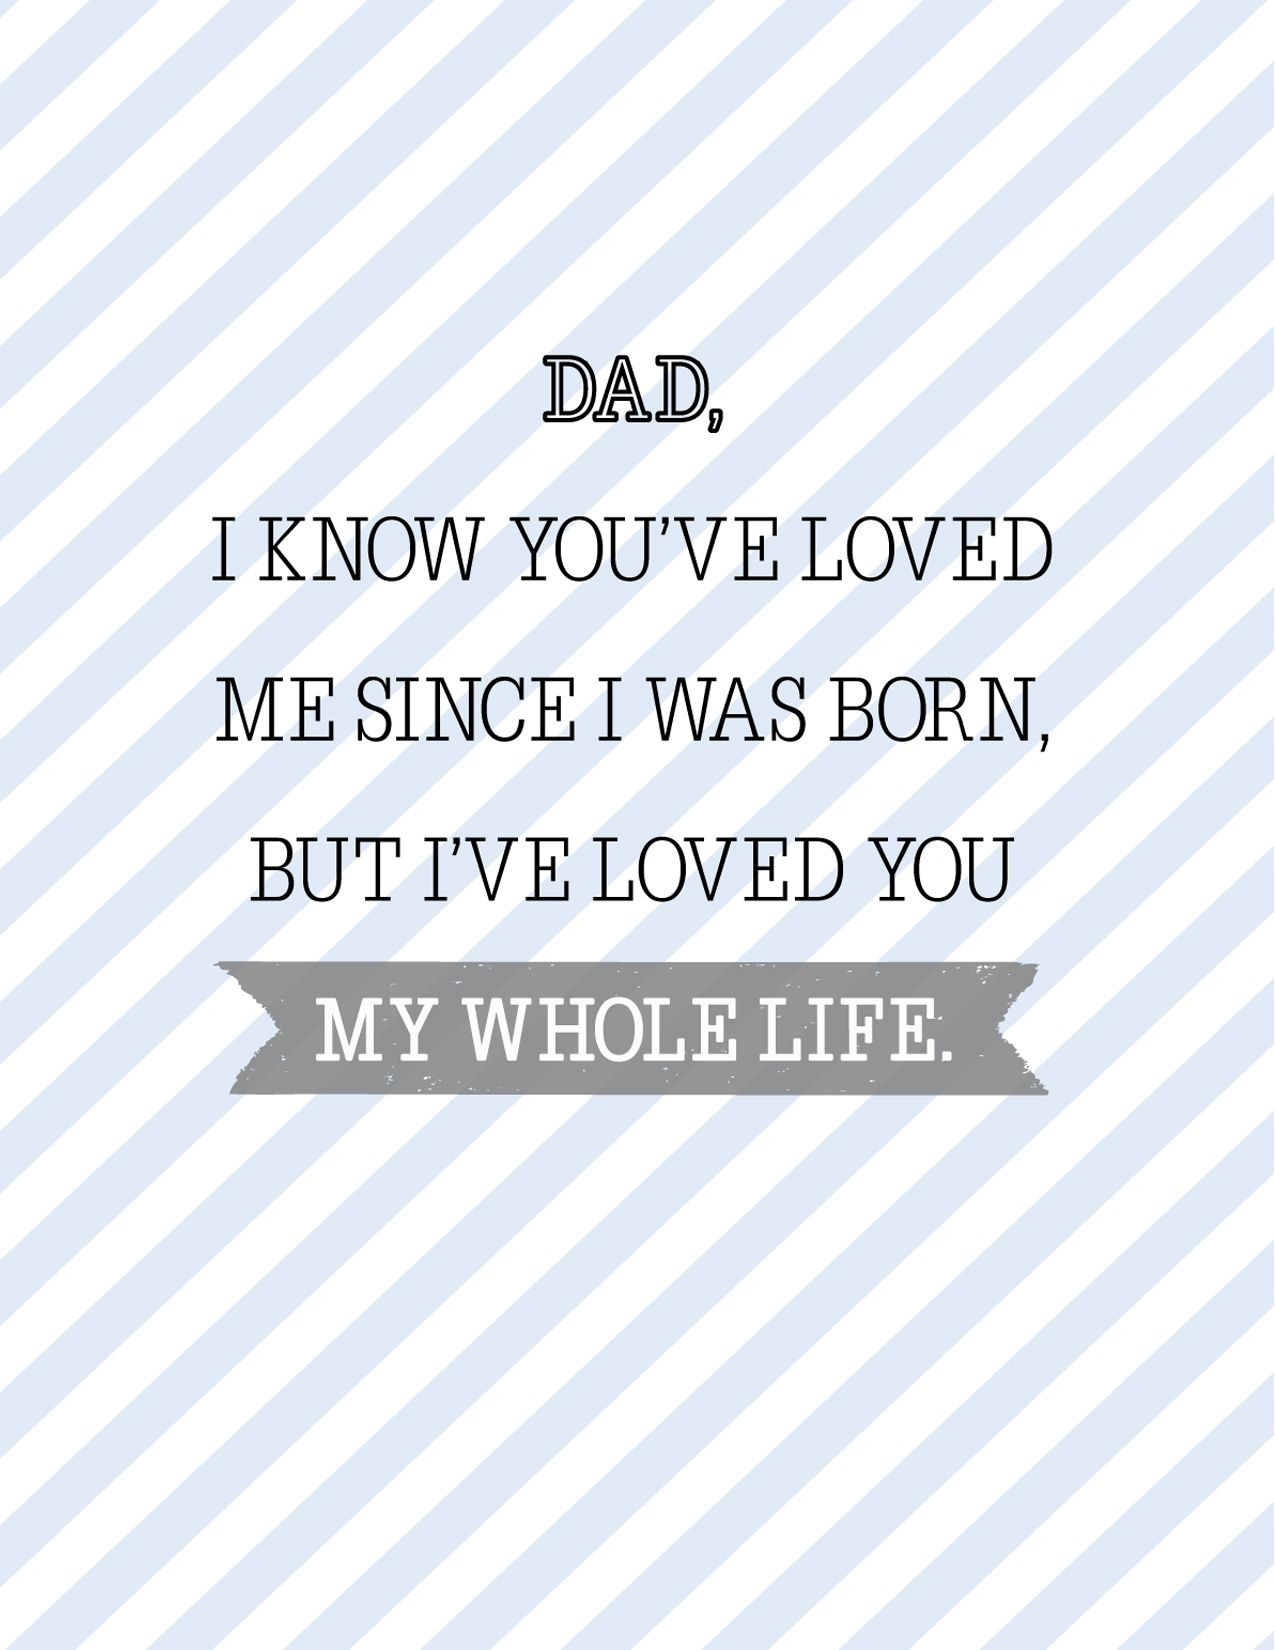 15 Free Printable Father&amp;#039;s Day Cards - Cute Online Father&amp;#039;s Day - Hallmark Free Printable Fathers Day Cards